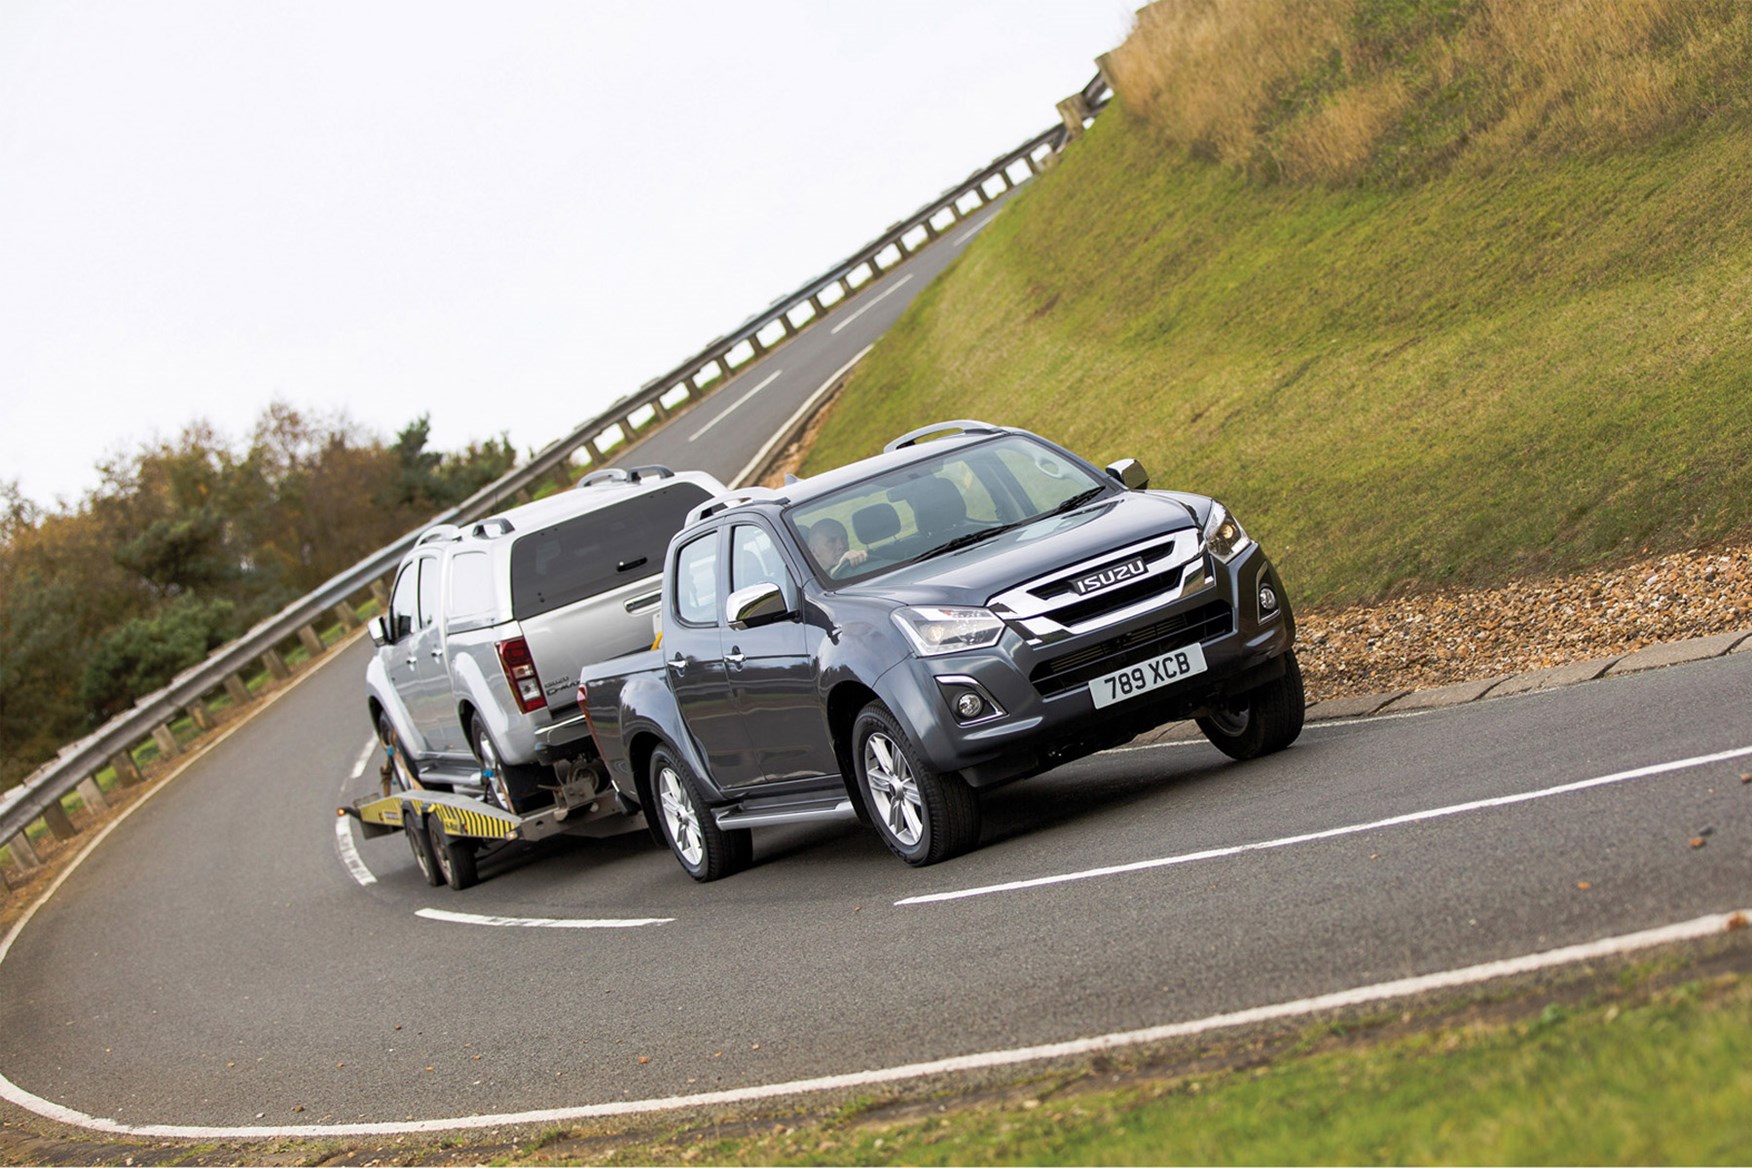 Isuzu D-Max full review on Parkers Vans - towing capability